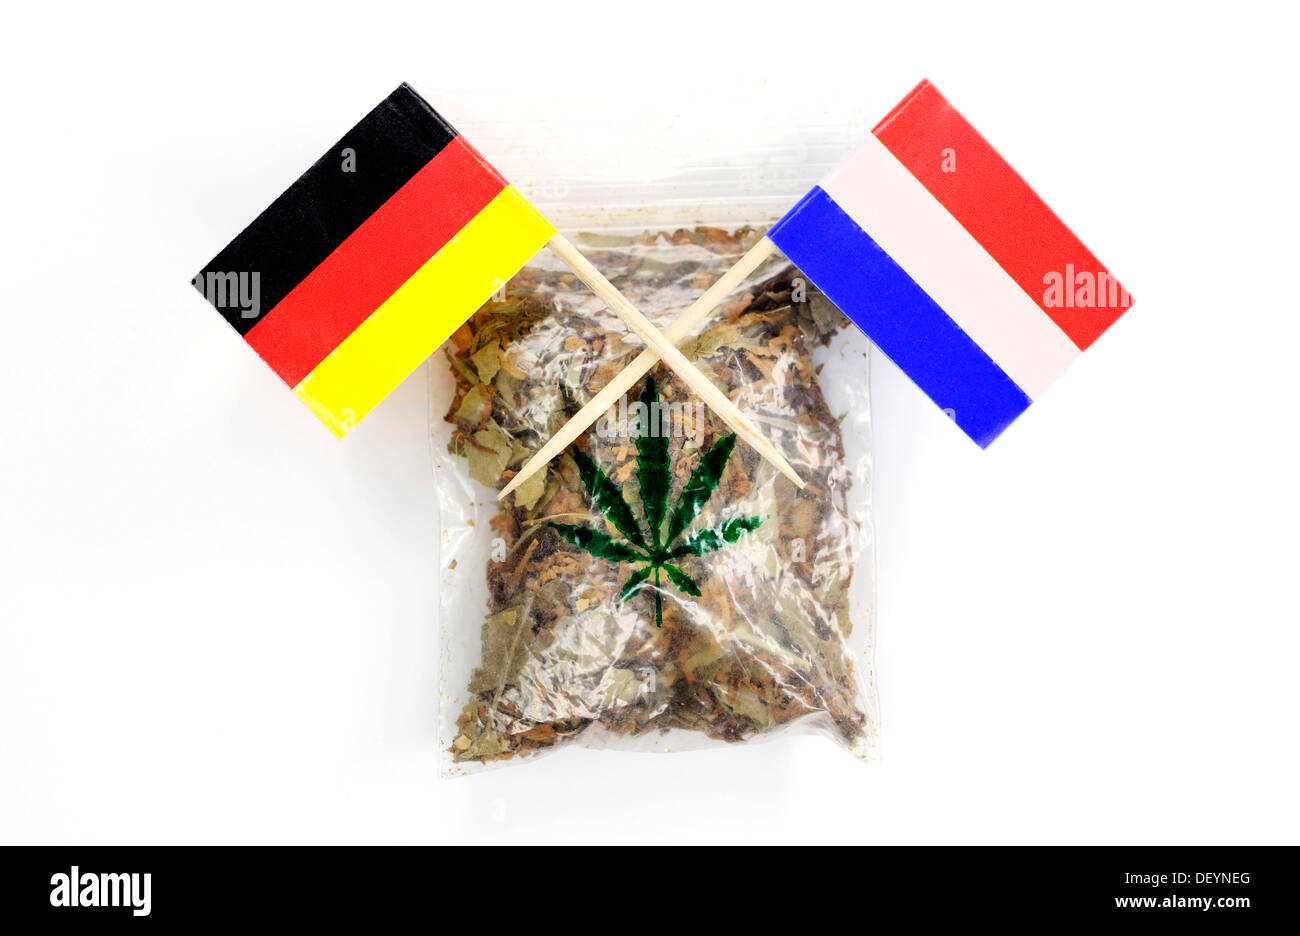 Bag of marijuana with the flags of Germany and the Netherlands, symbolic image Stock Photo